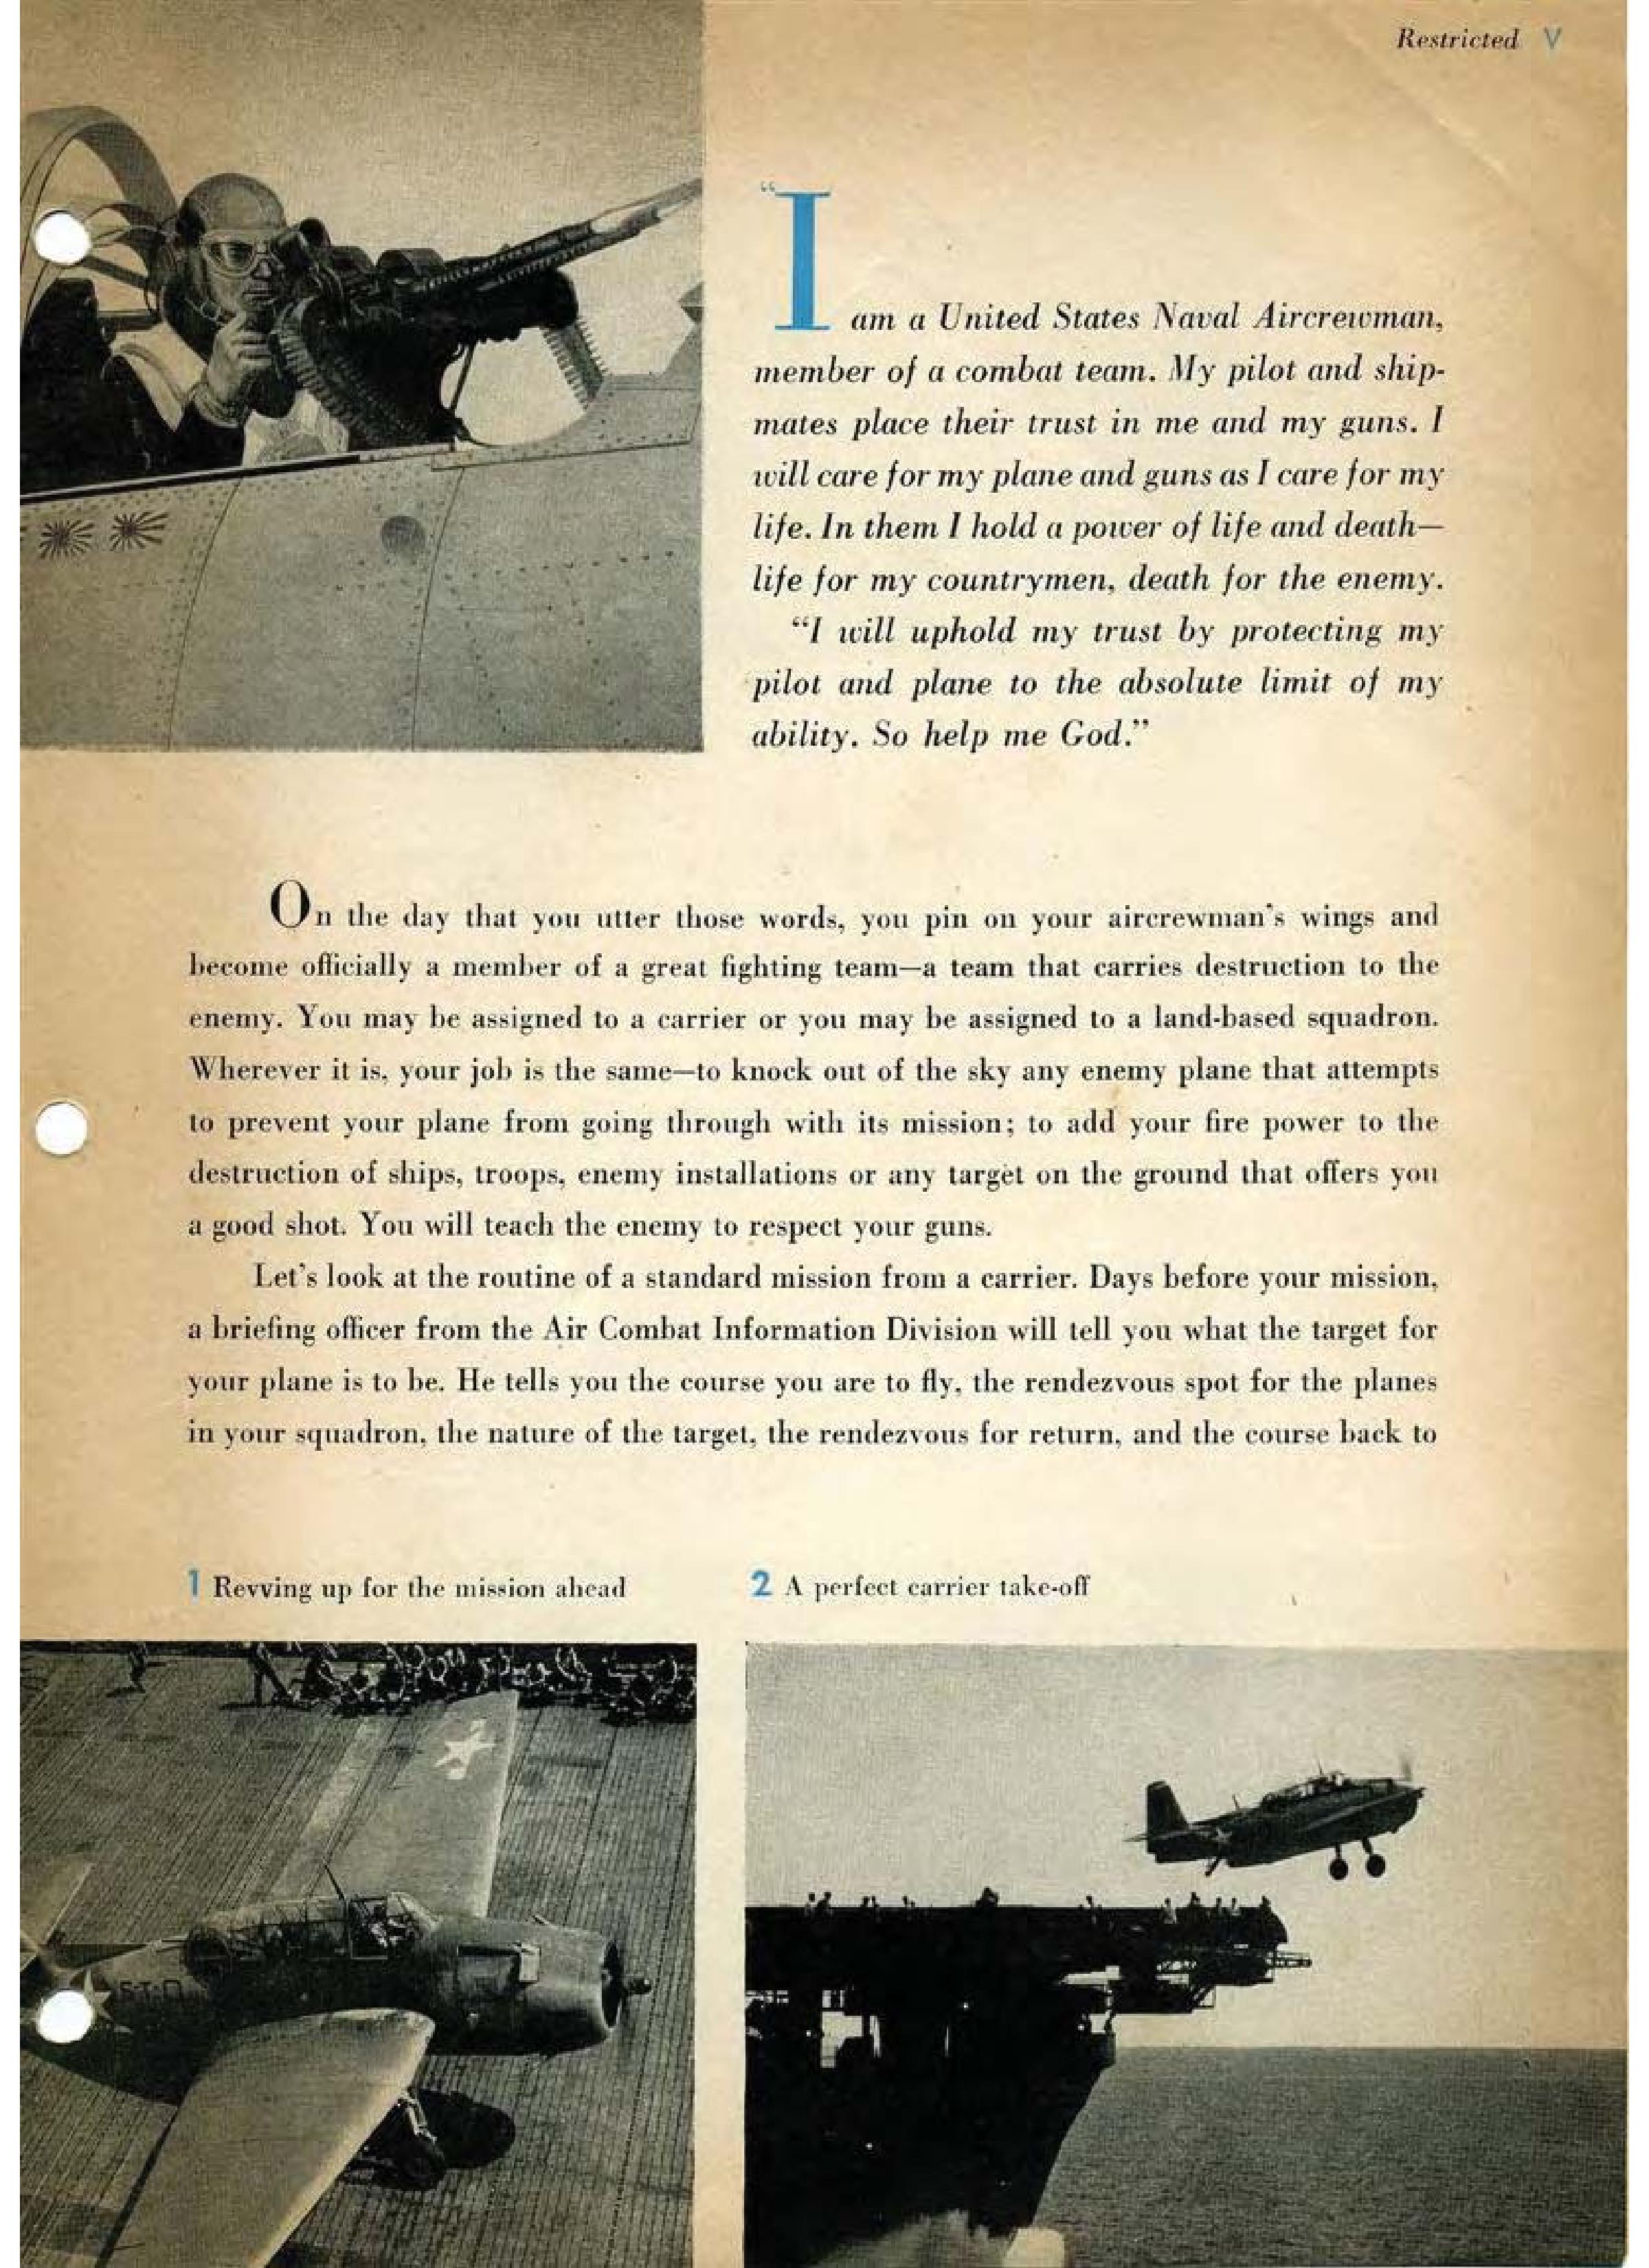 Sample page 6 from AirCorps Library document: Aircrewman's Gunnery Manual